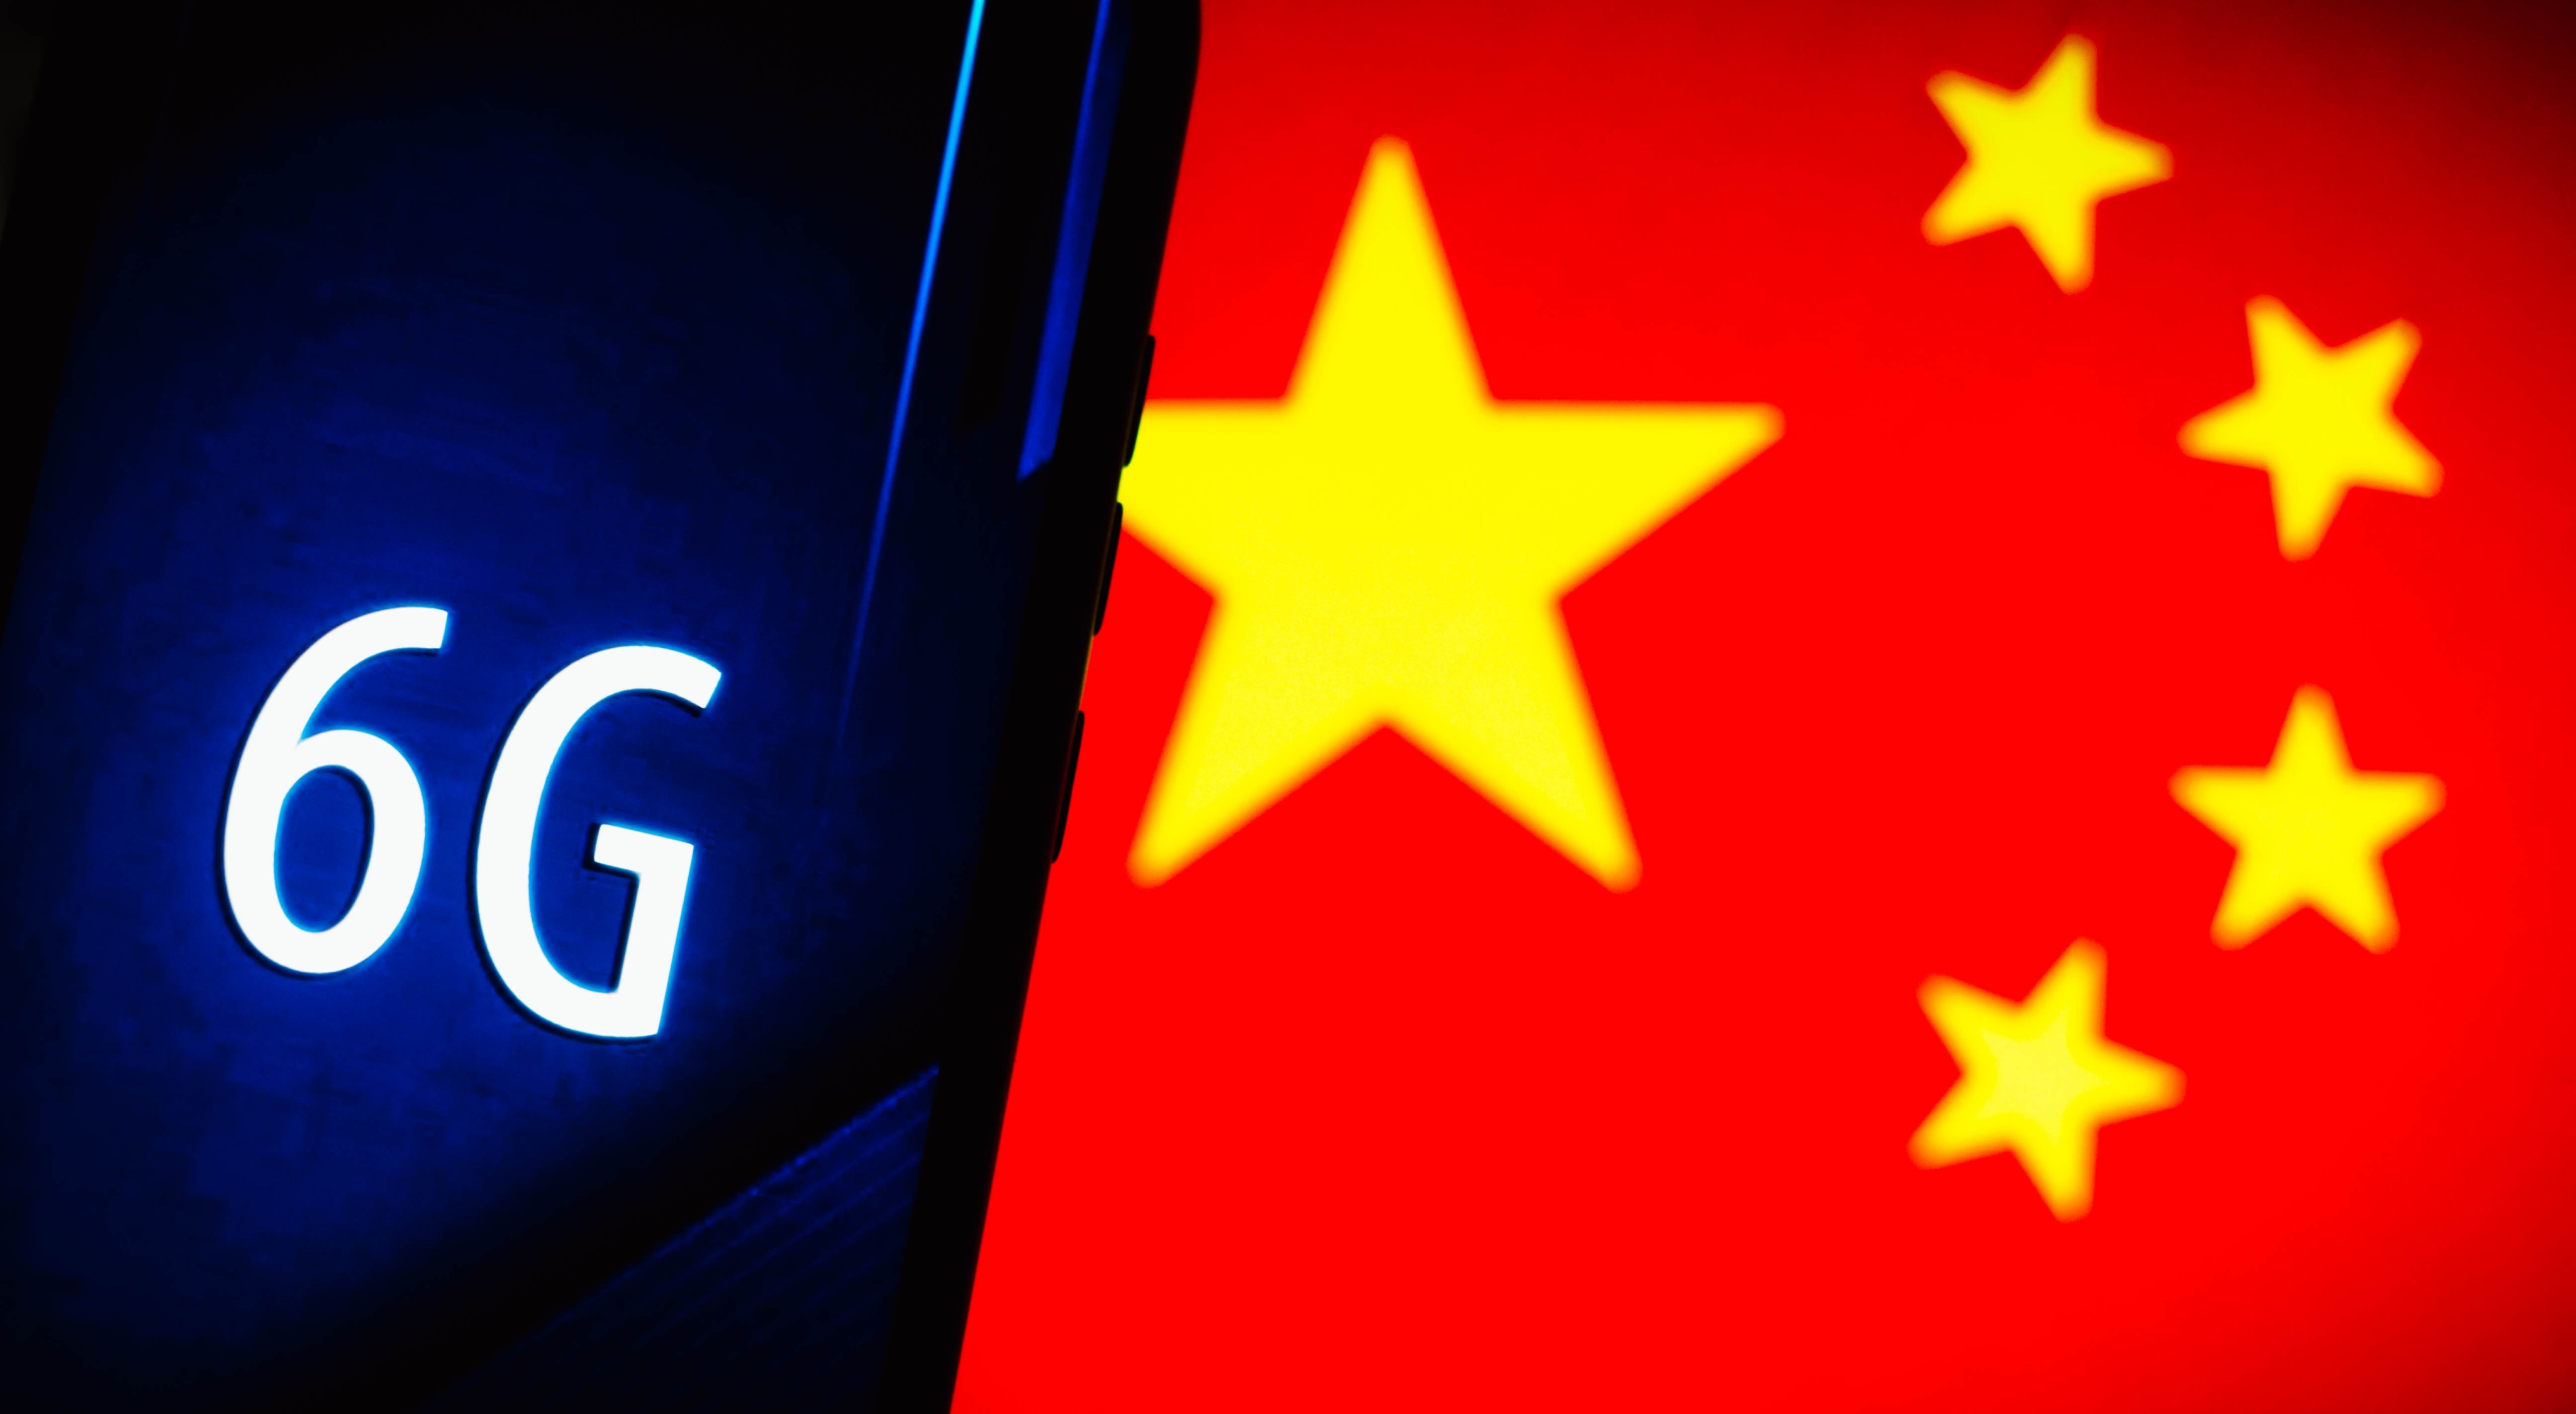 The mainland’s three major telecommunications network operators – China Mobile, China Telecom and China Unicom – are expected to start commercial 6G mobile services from 2030. Photo: Shutterstock